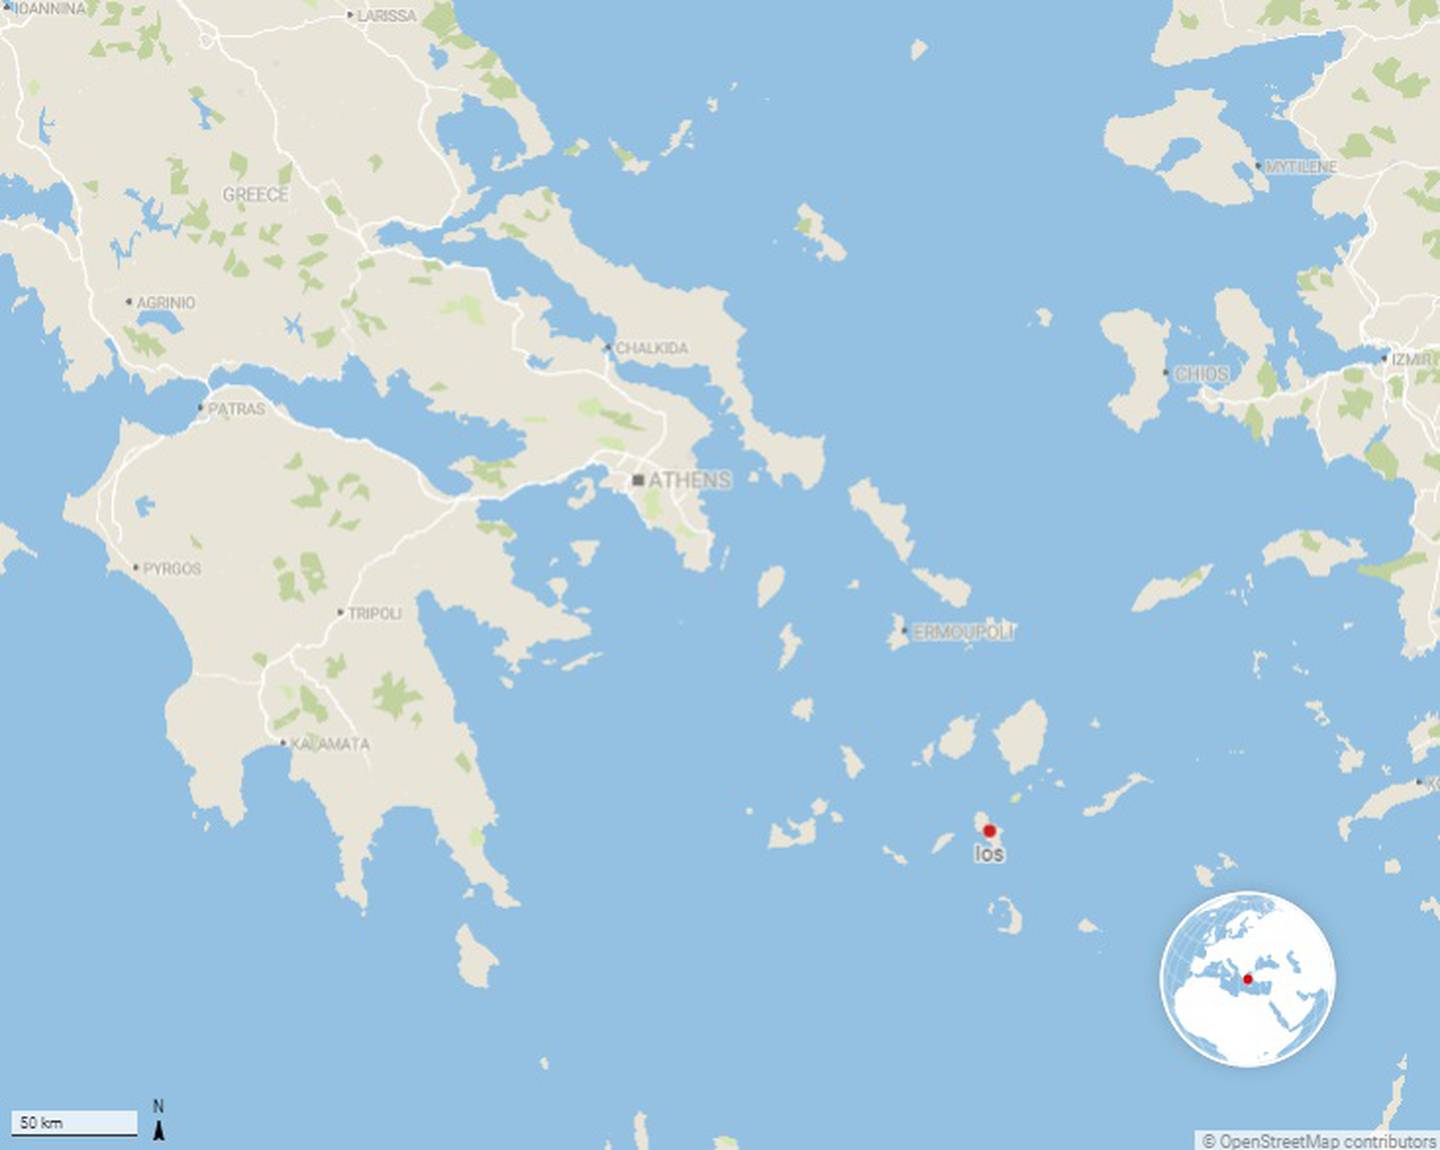 Map showing the Greek island of Ios